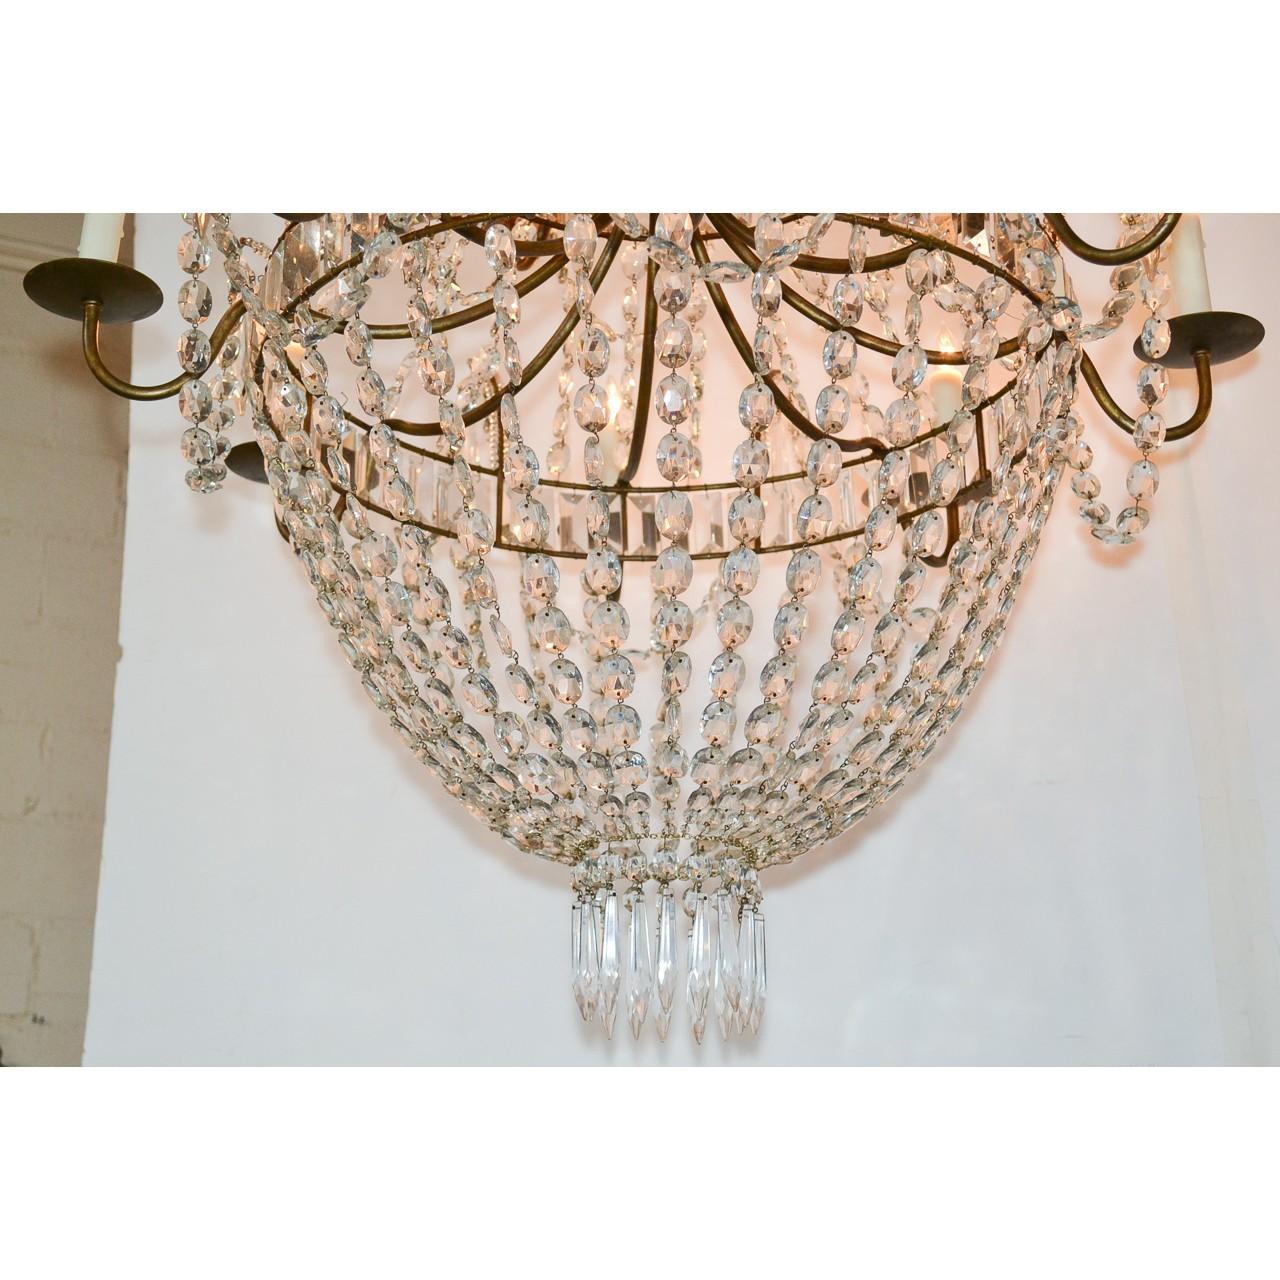 Gorgeous Swedish hand-cut crystal basket form chandelier having three graduated banded tiers inset with baguette crystal prisms. Each tier draped with strands of bead cut crystals and accented with diamond-shaped prisms, and icicle drops. Mounted